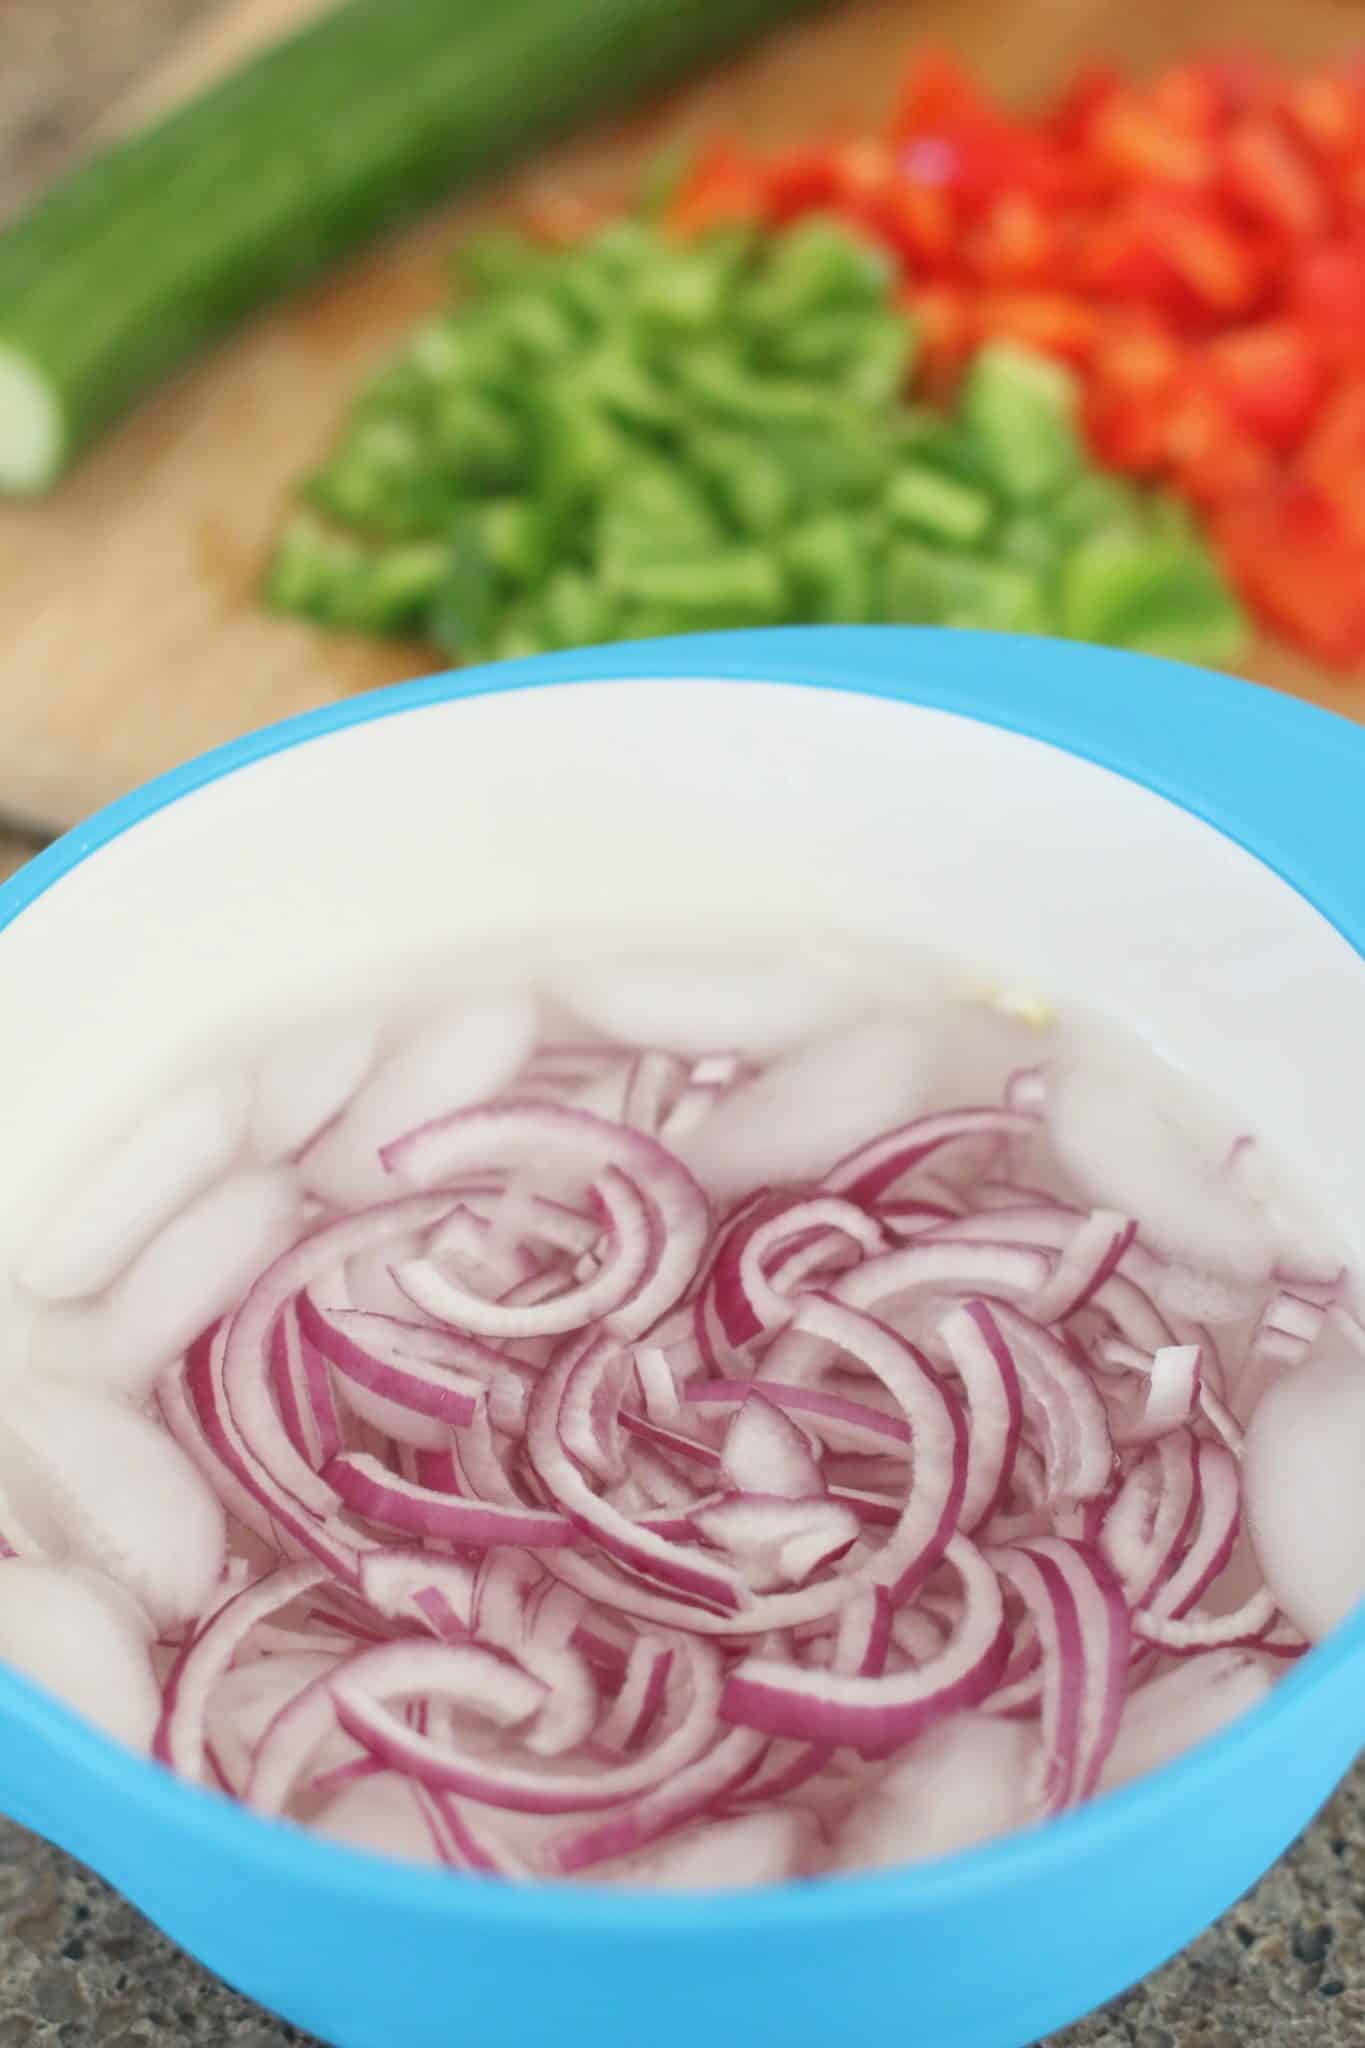 sliced red onions soaking in a bowl of ice water.